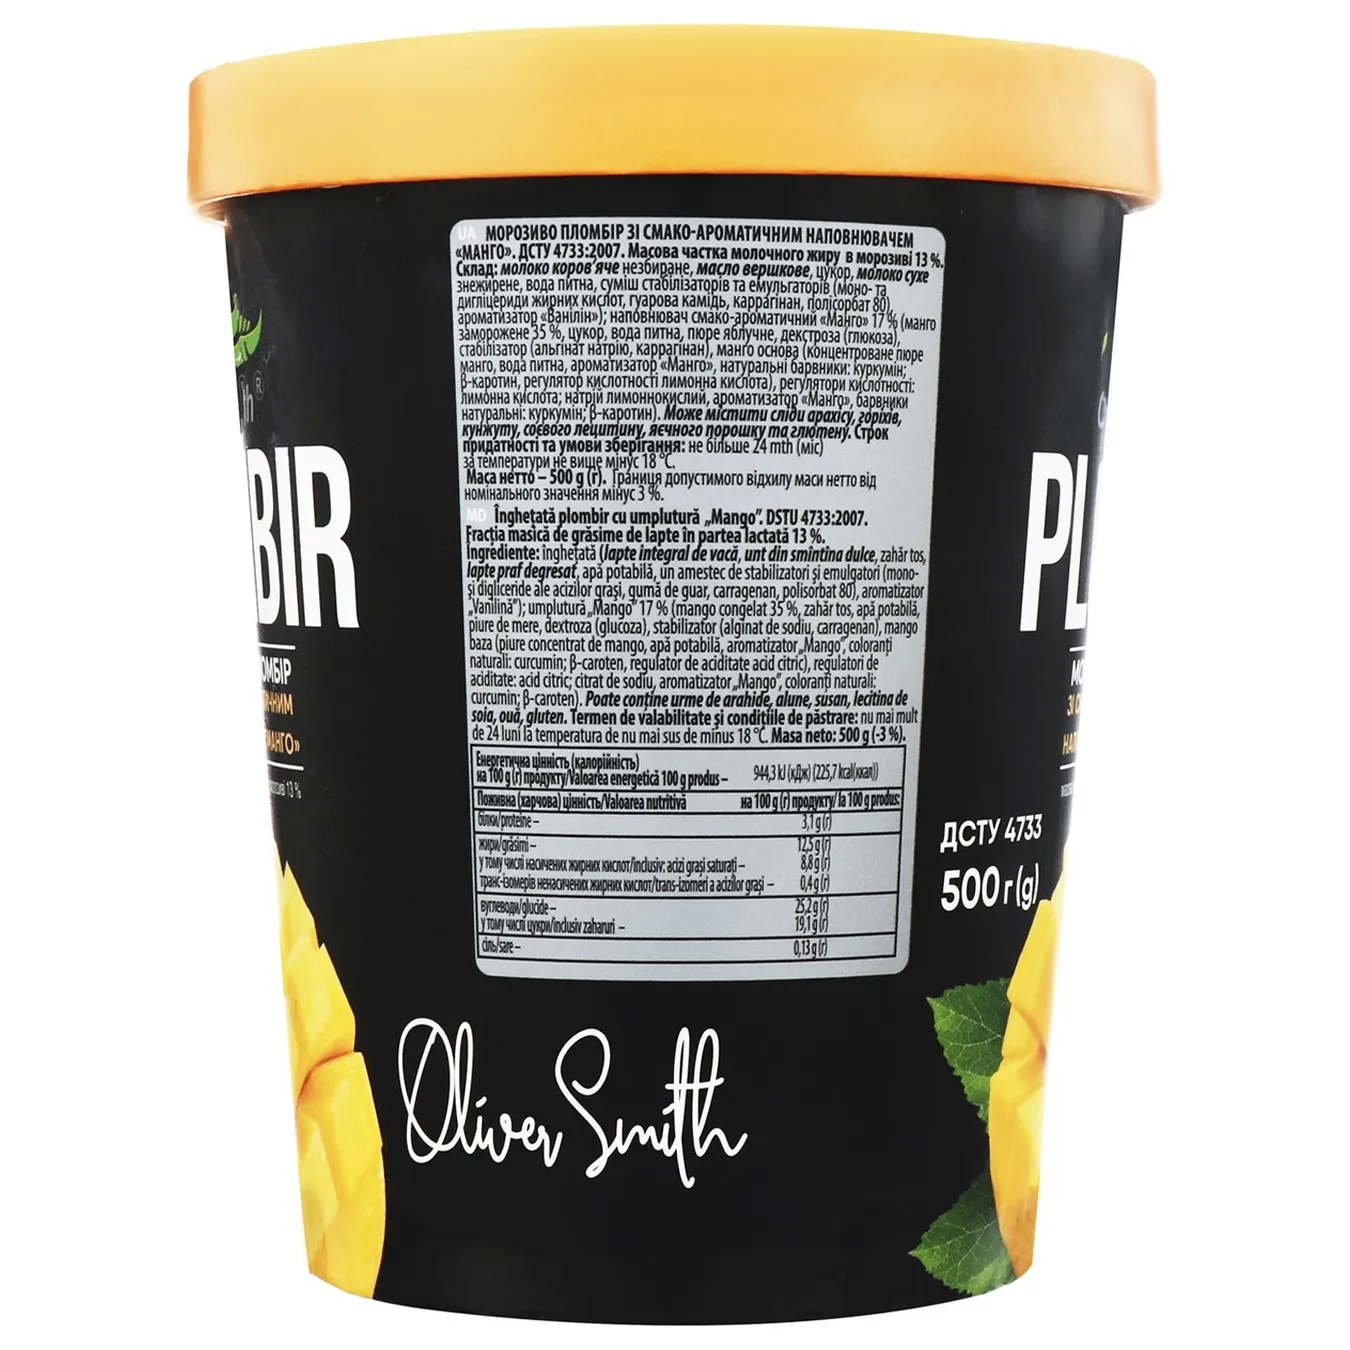 Oliver Smith Ice cream Traditions of New Zealand filling with mango filling 500g 2